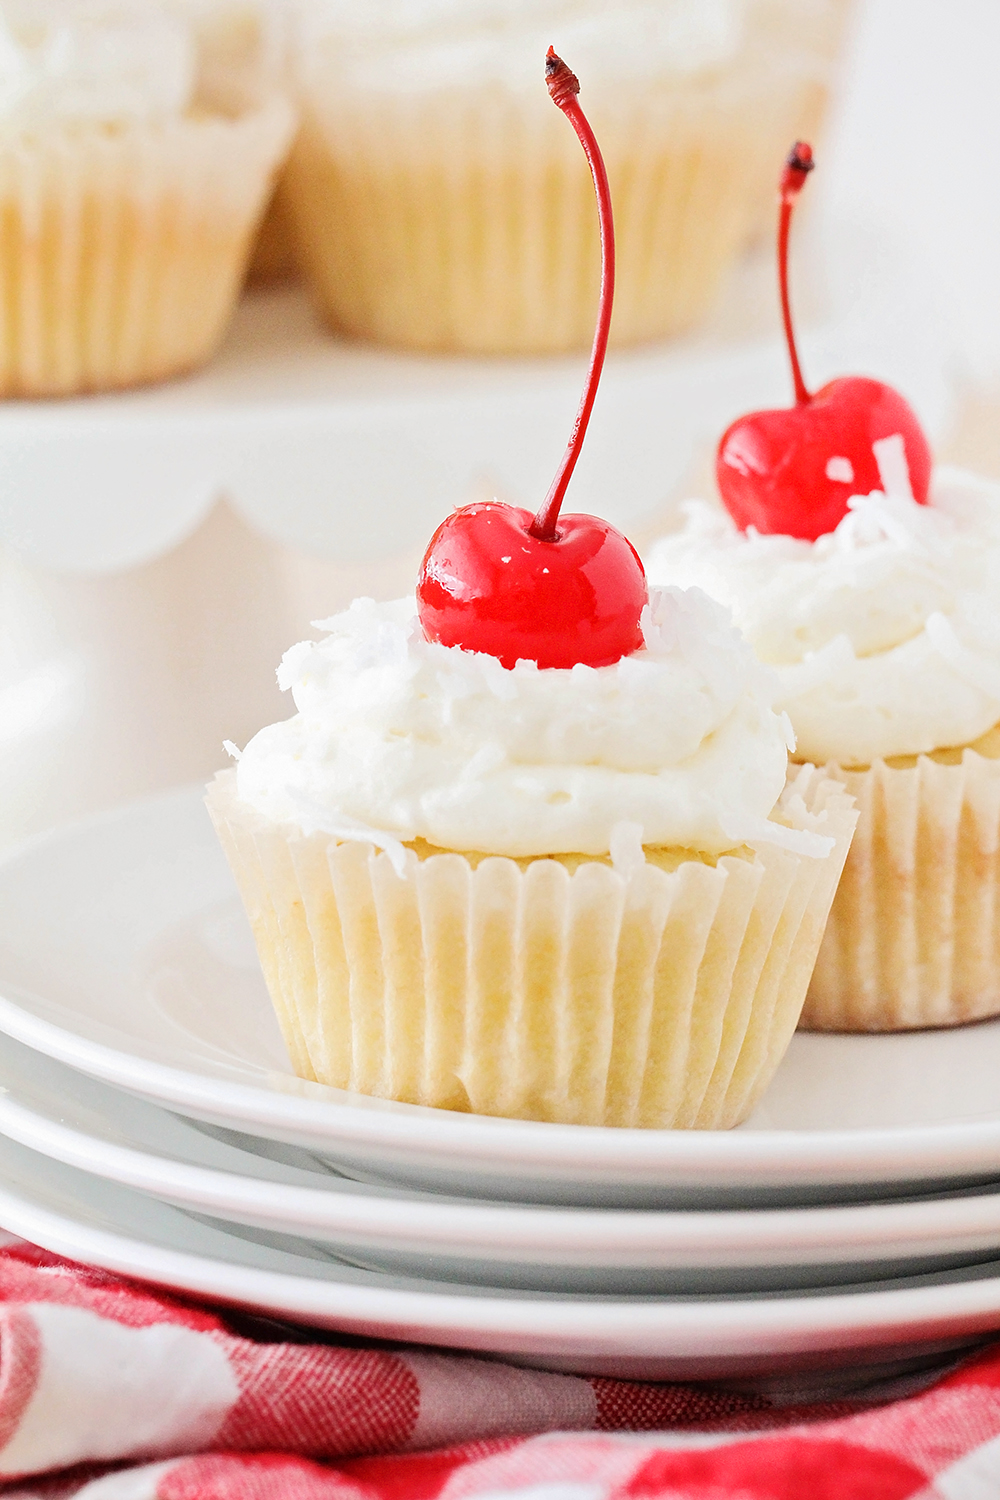 These piña colada cupcakes have the perfect combination of flavors, and a light and tender crumb. So delicious and easy to make too!